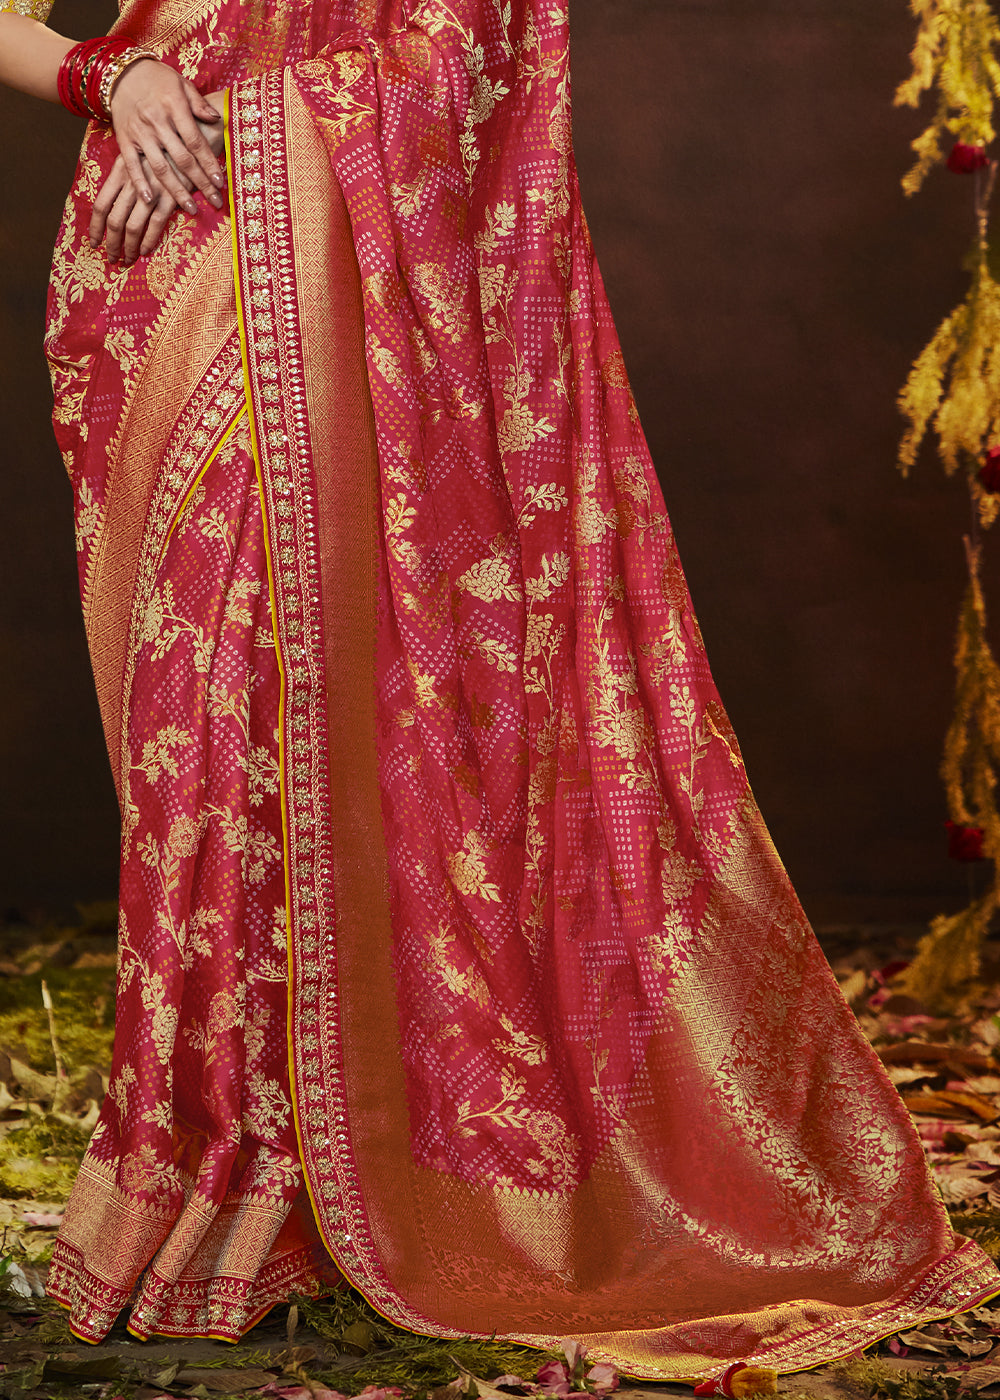 Bold Tart Red Georgette Bandhani Saree for a Festive Look